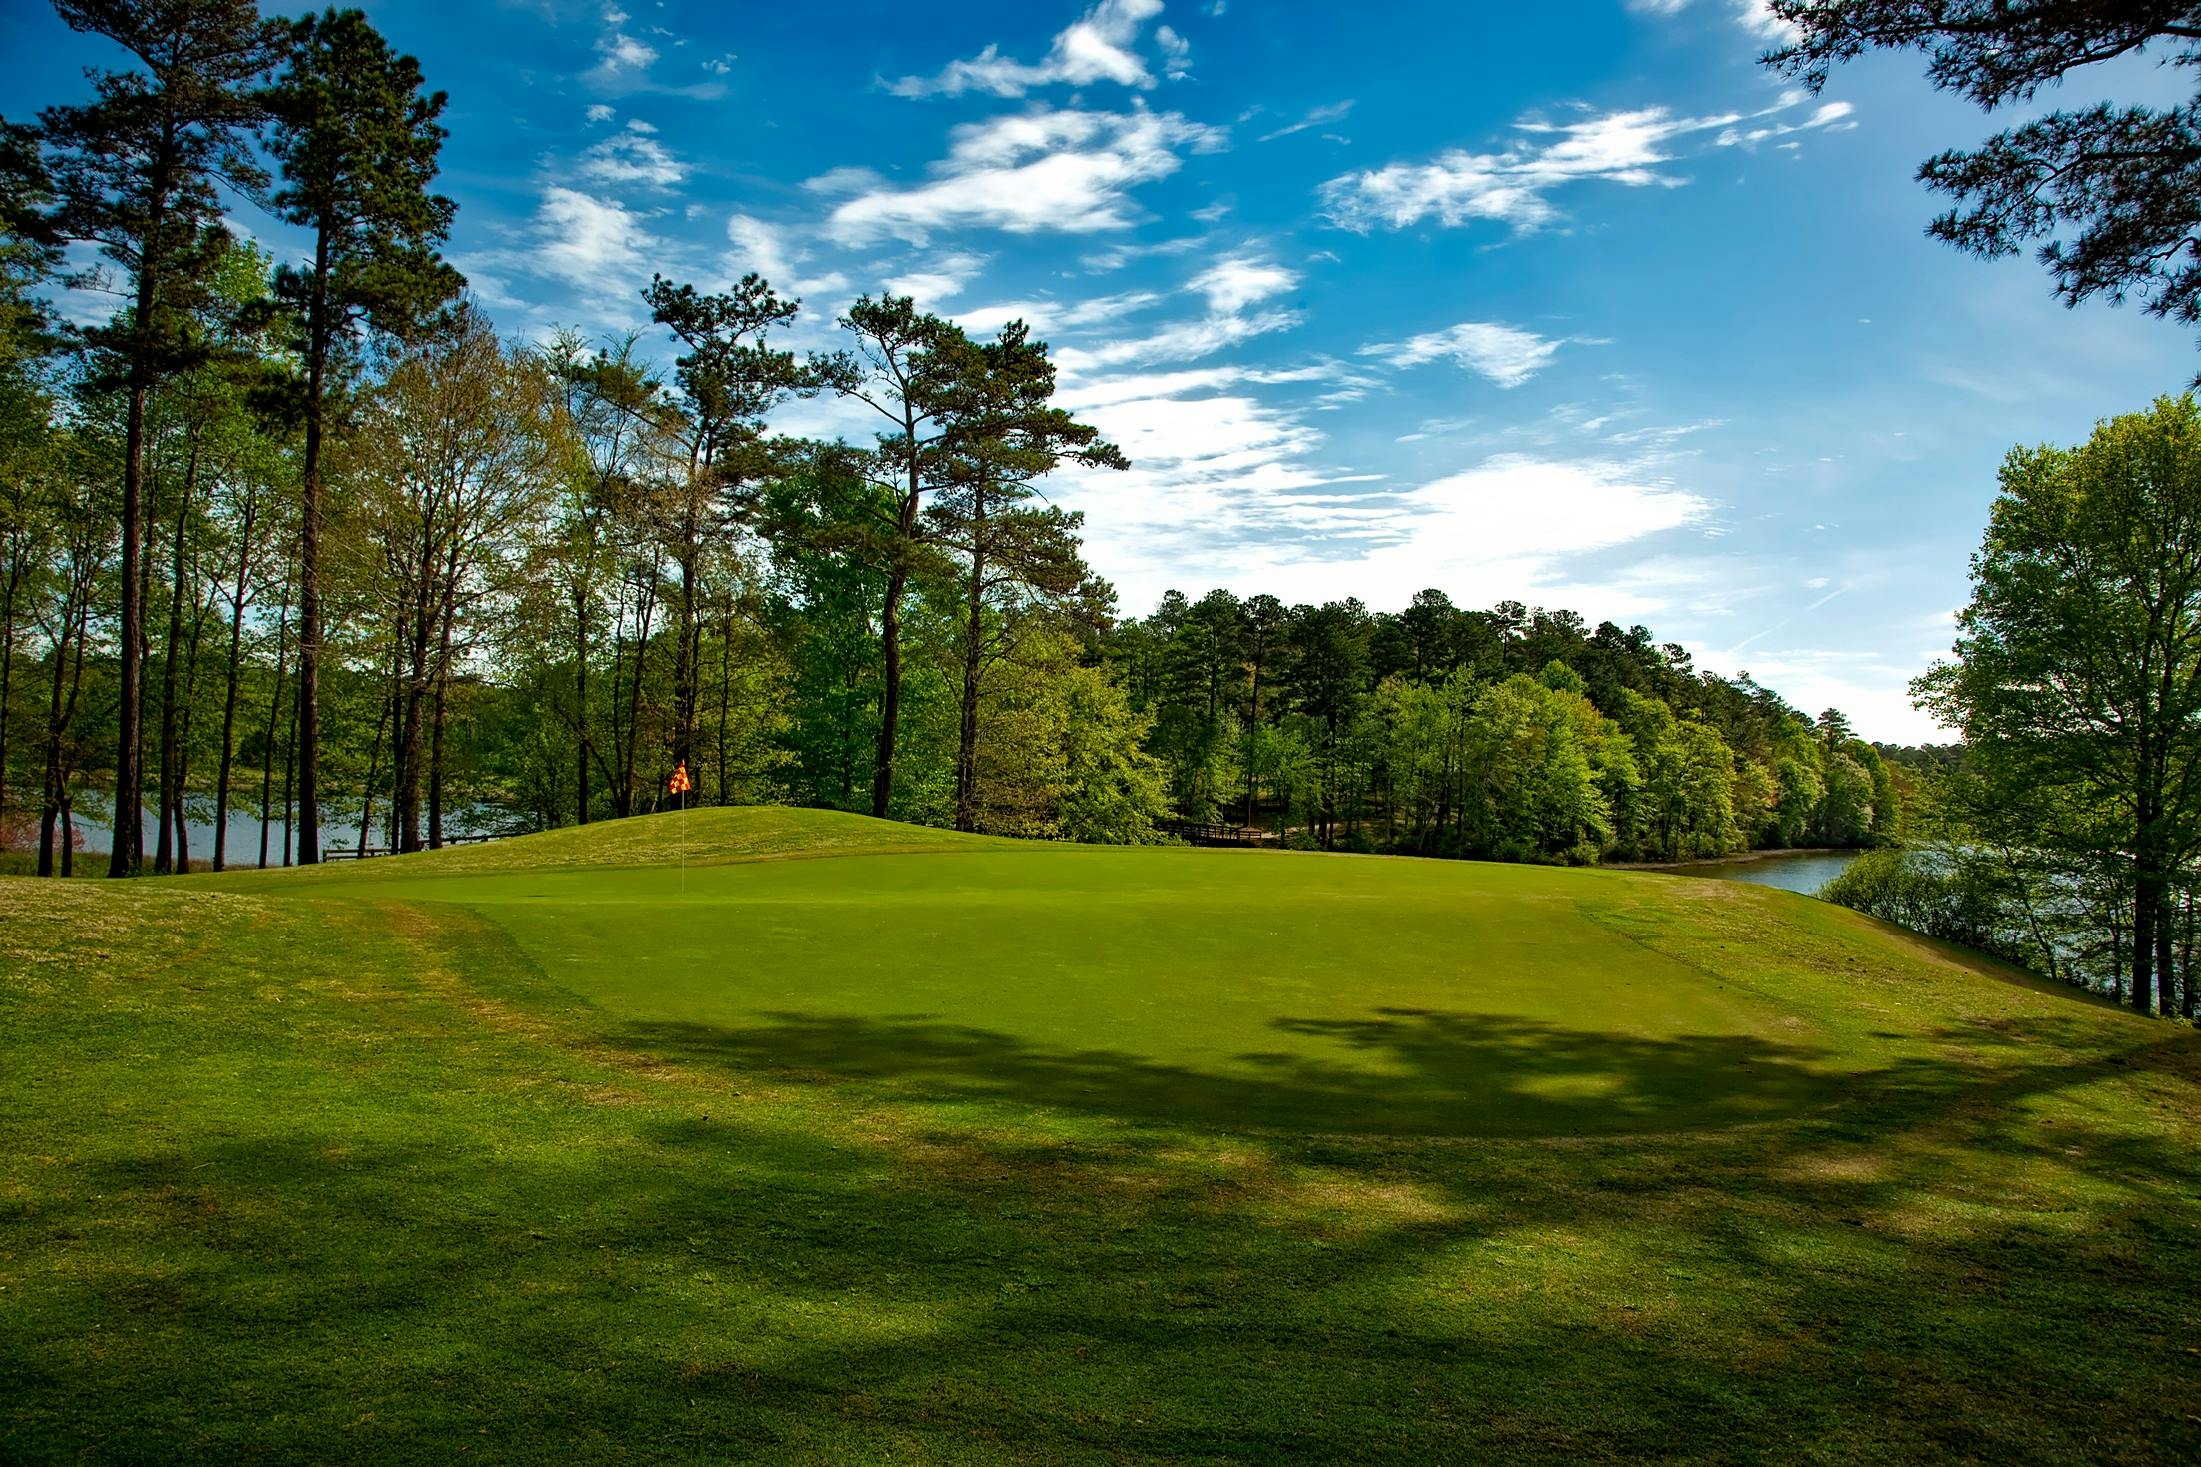 Golf Course Photos, Download The BEST Free Golf Course Stock Photos & HD  Images